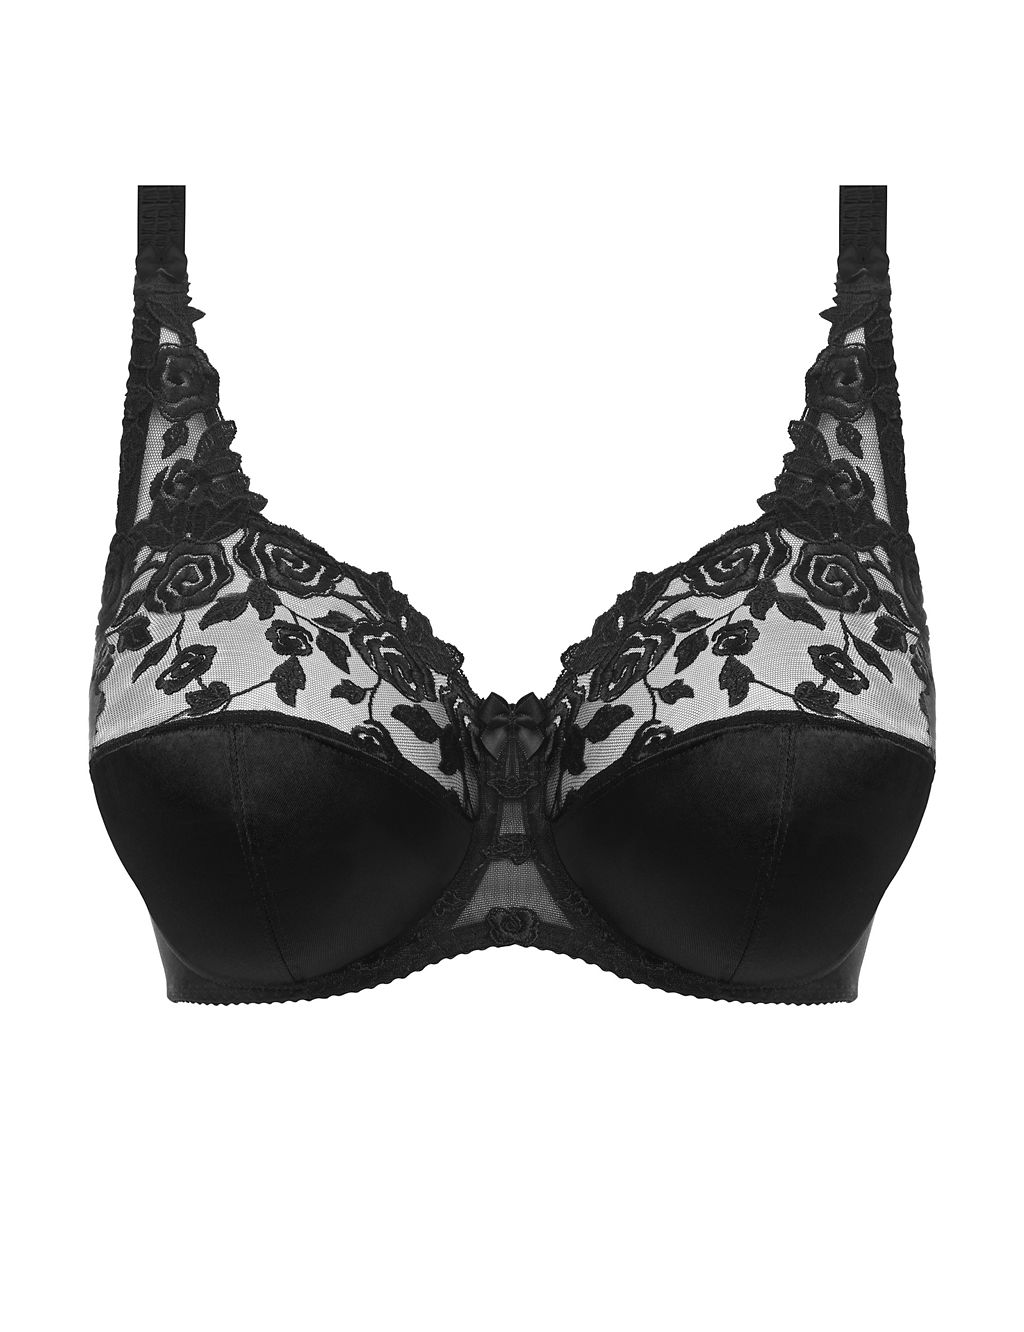 Belle Lace Wired Full Cup Bra DD-G 1 of 3